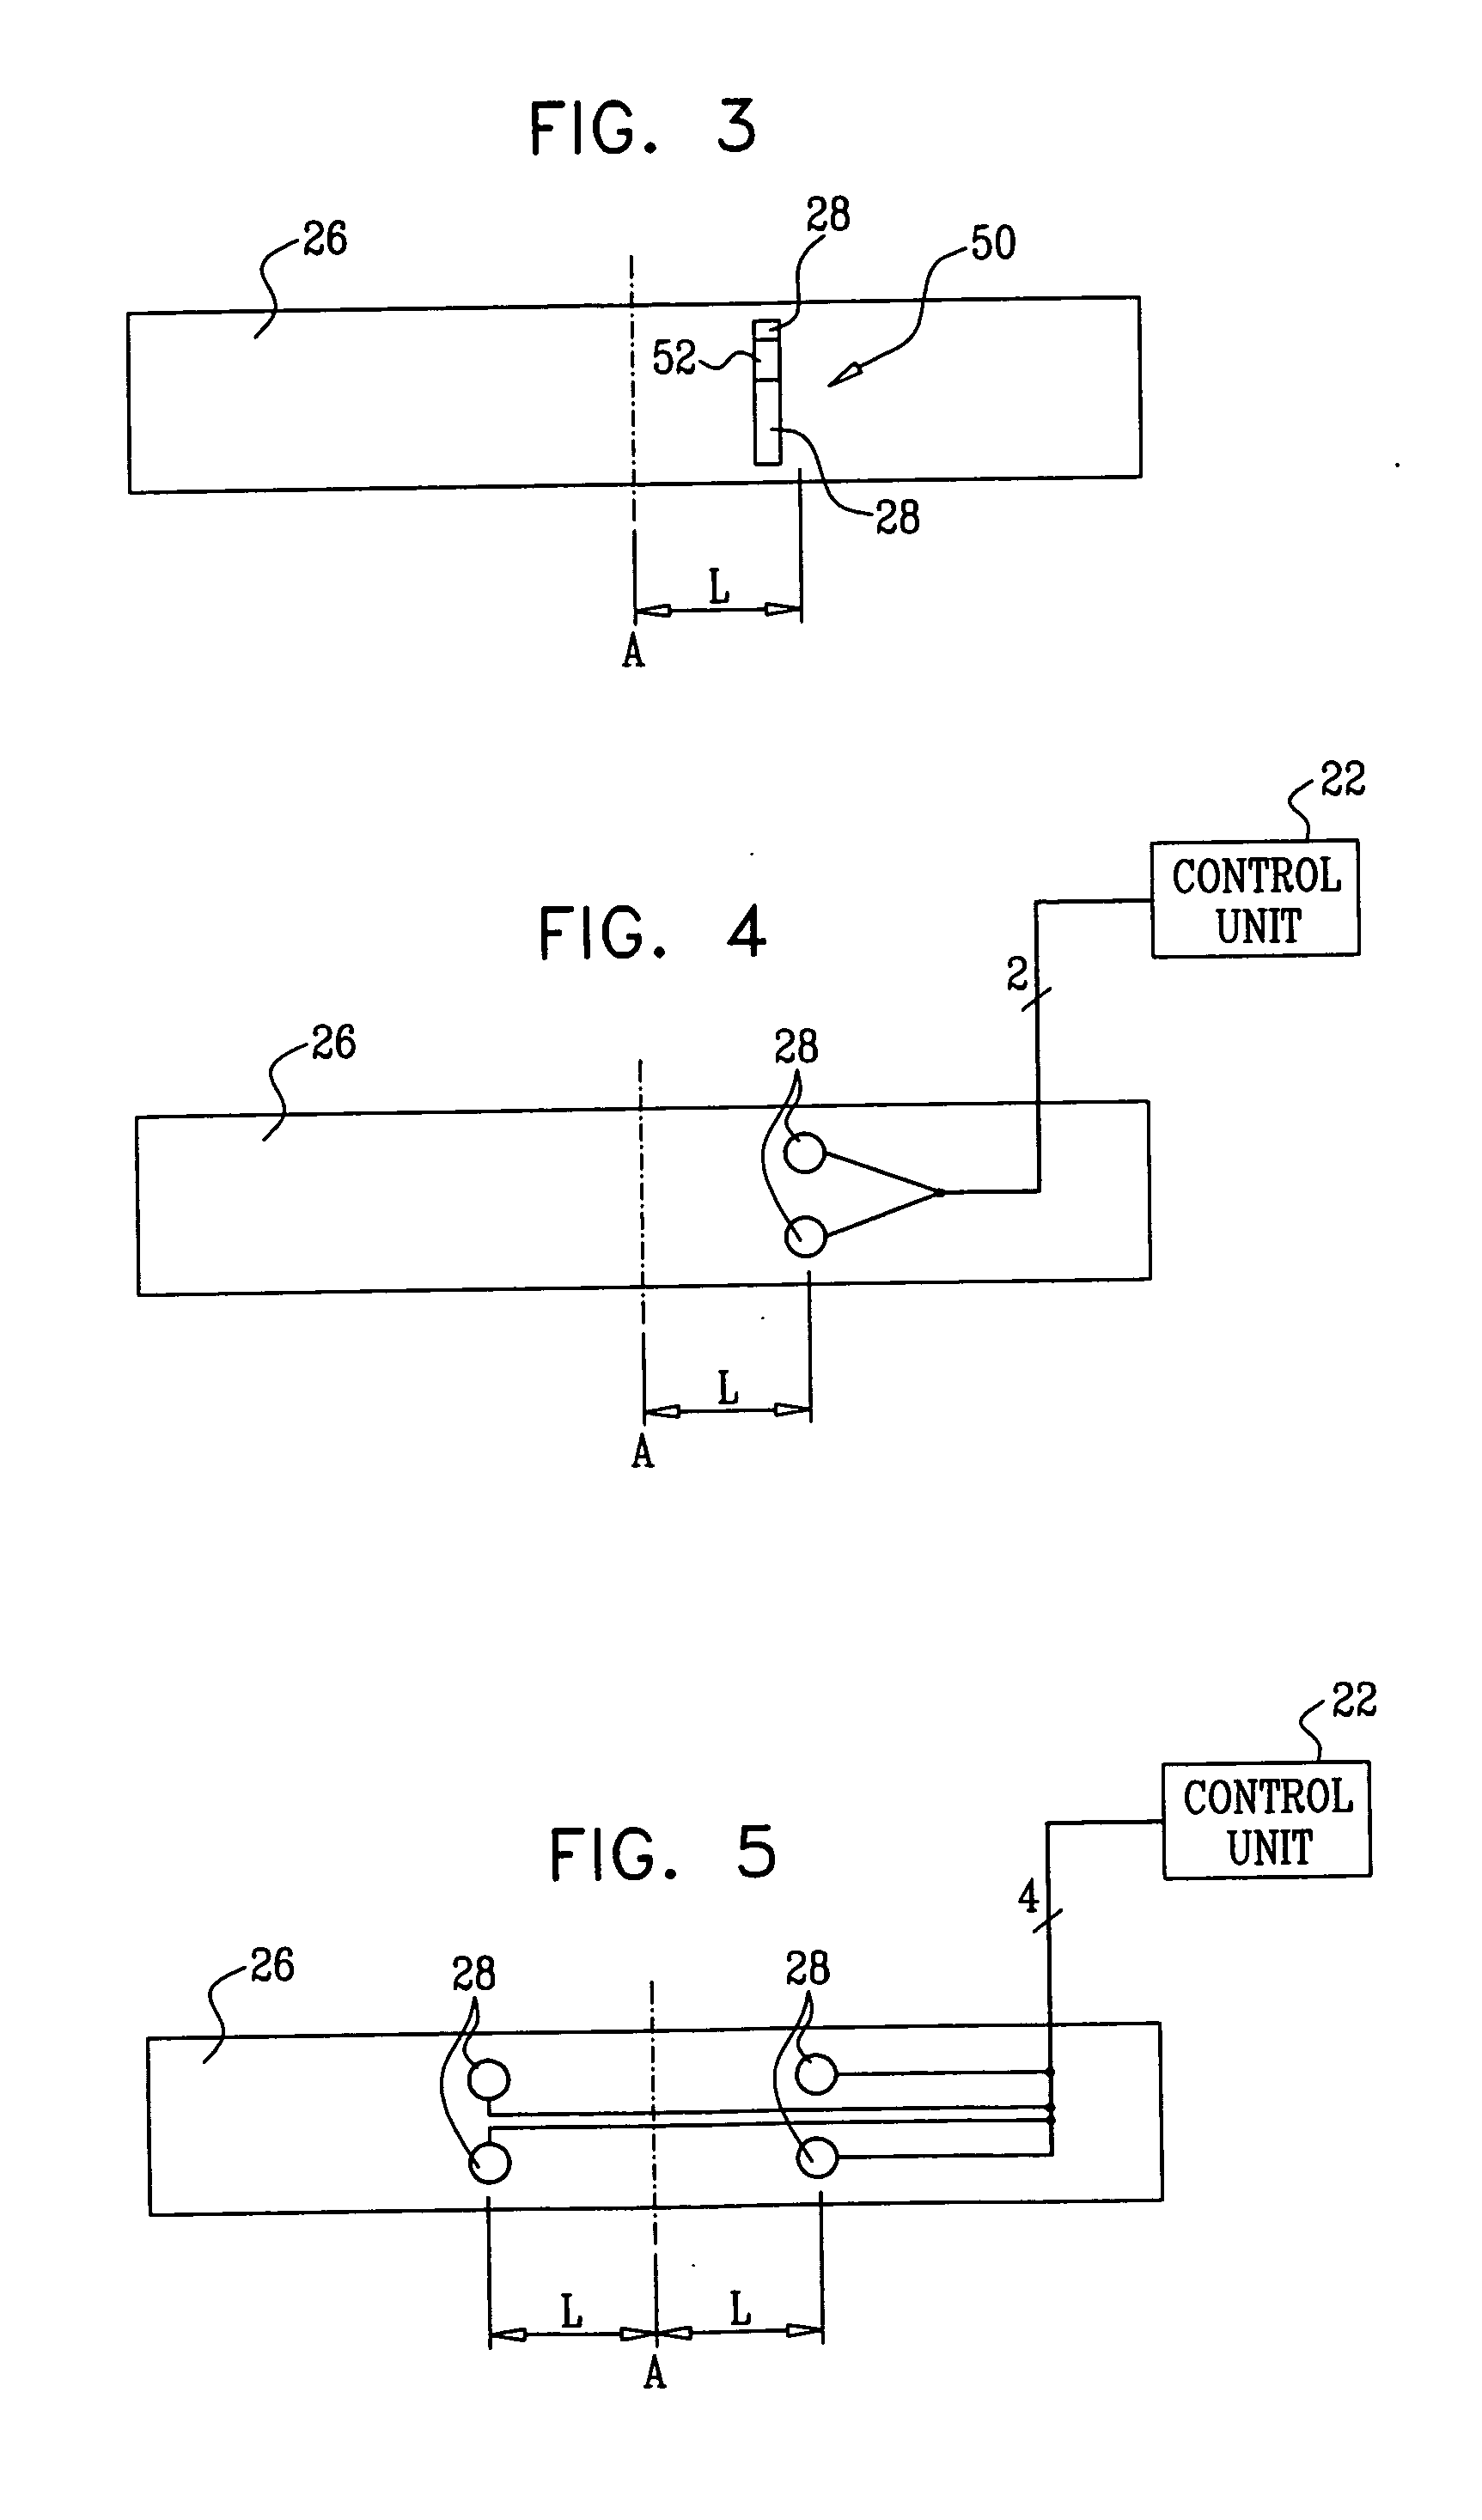 Apparatus for treating stress and urge incontinence